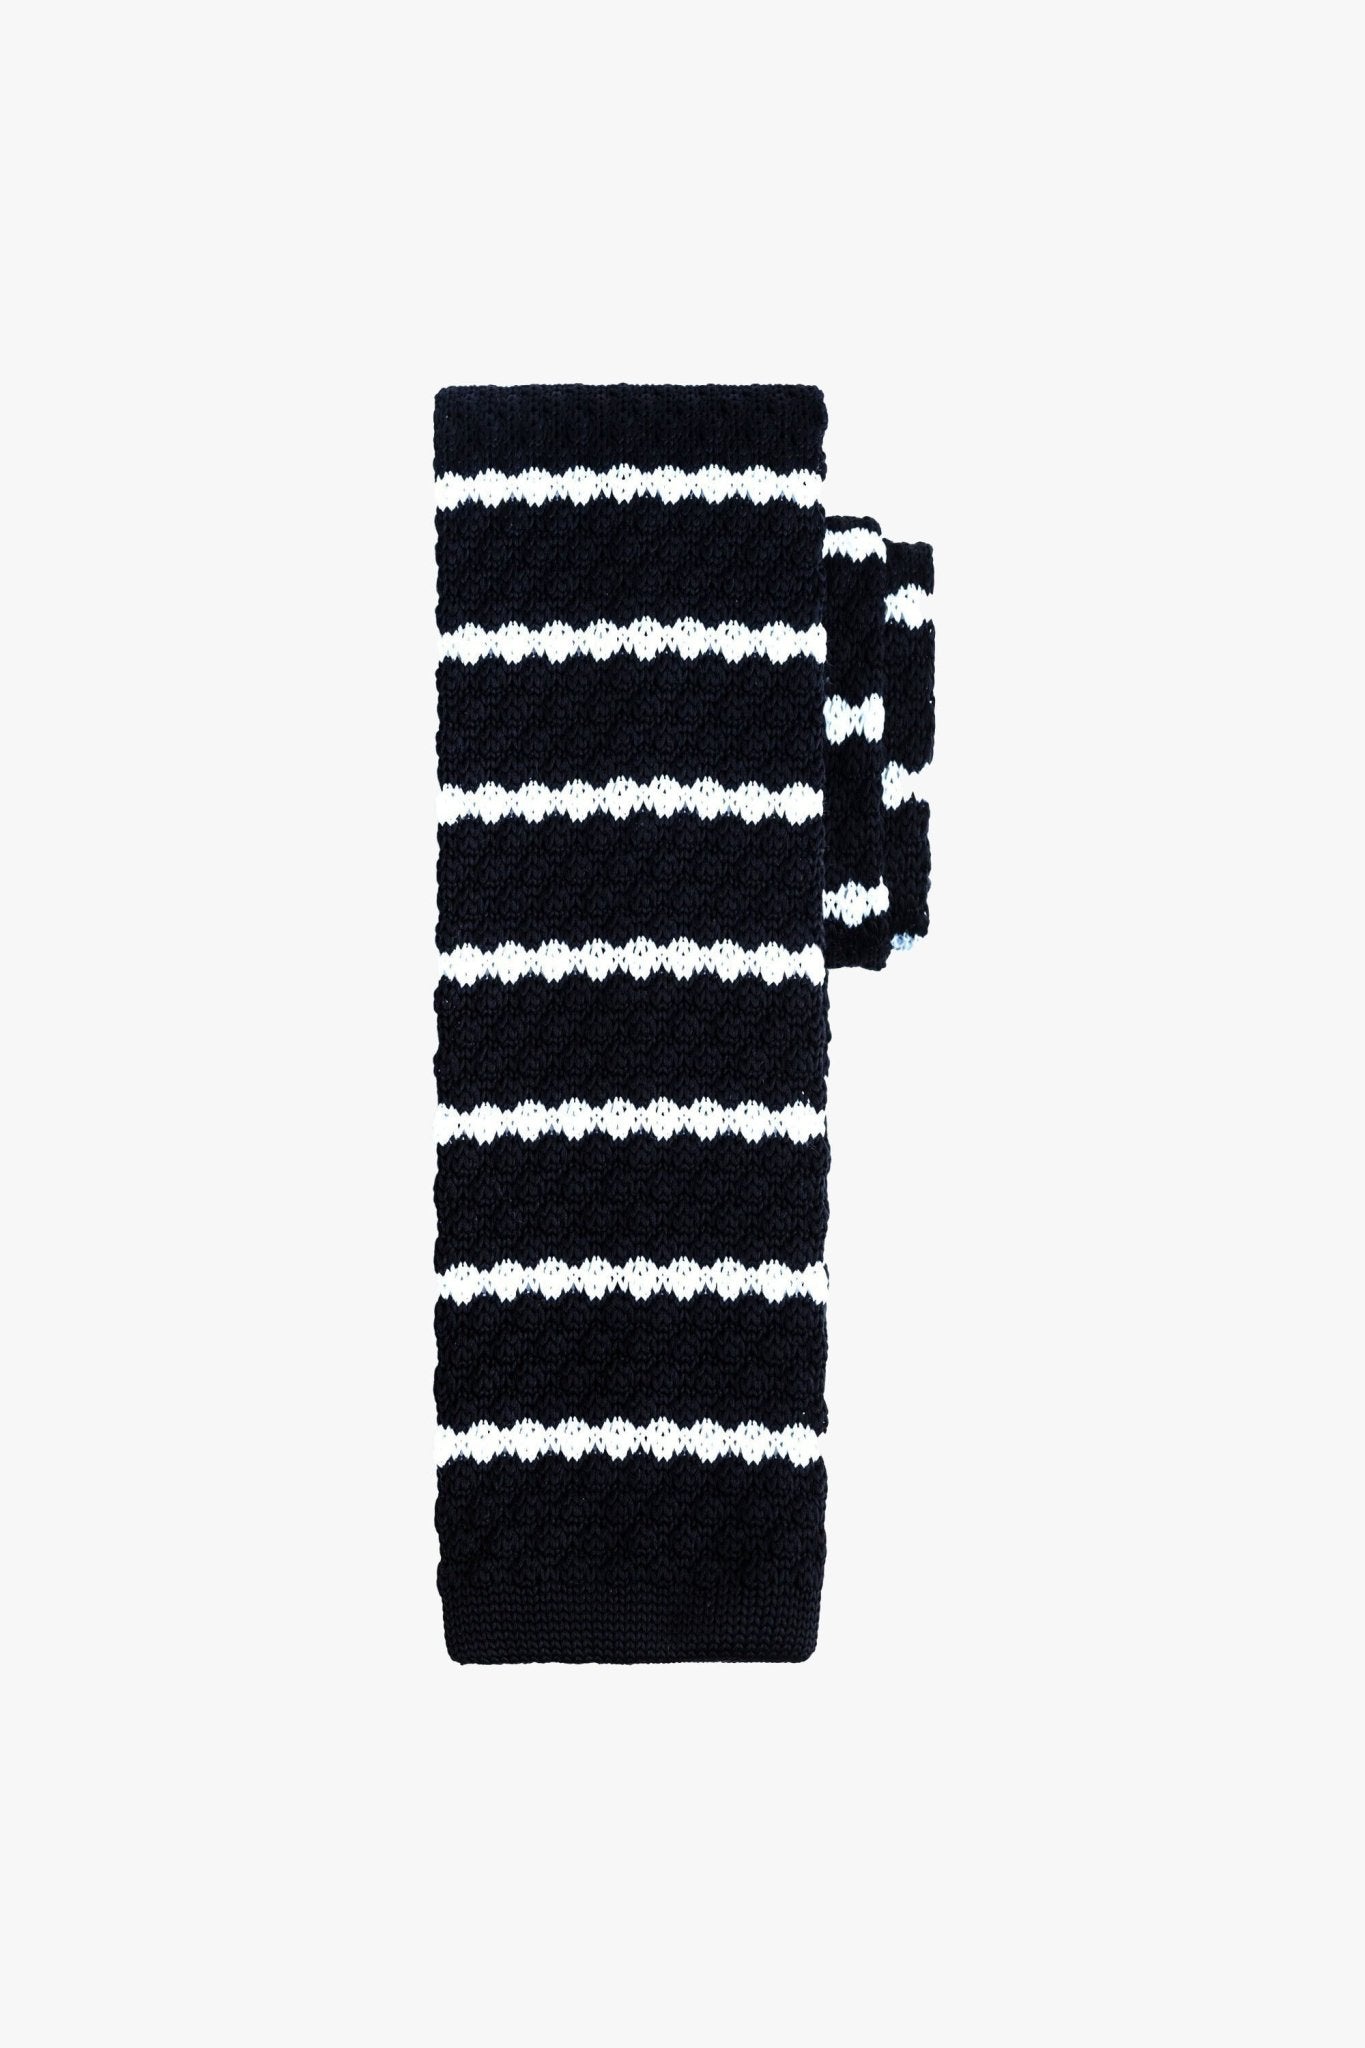 Black Stripe Knitted Tie - My Suited Life